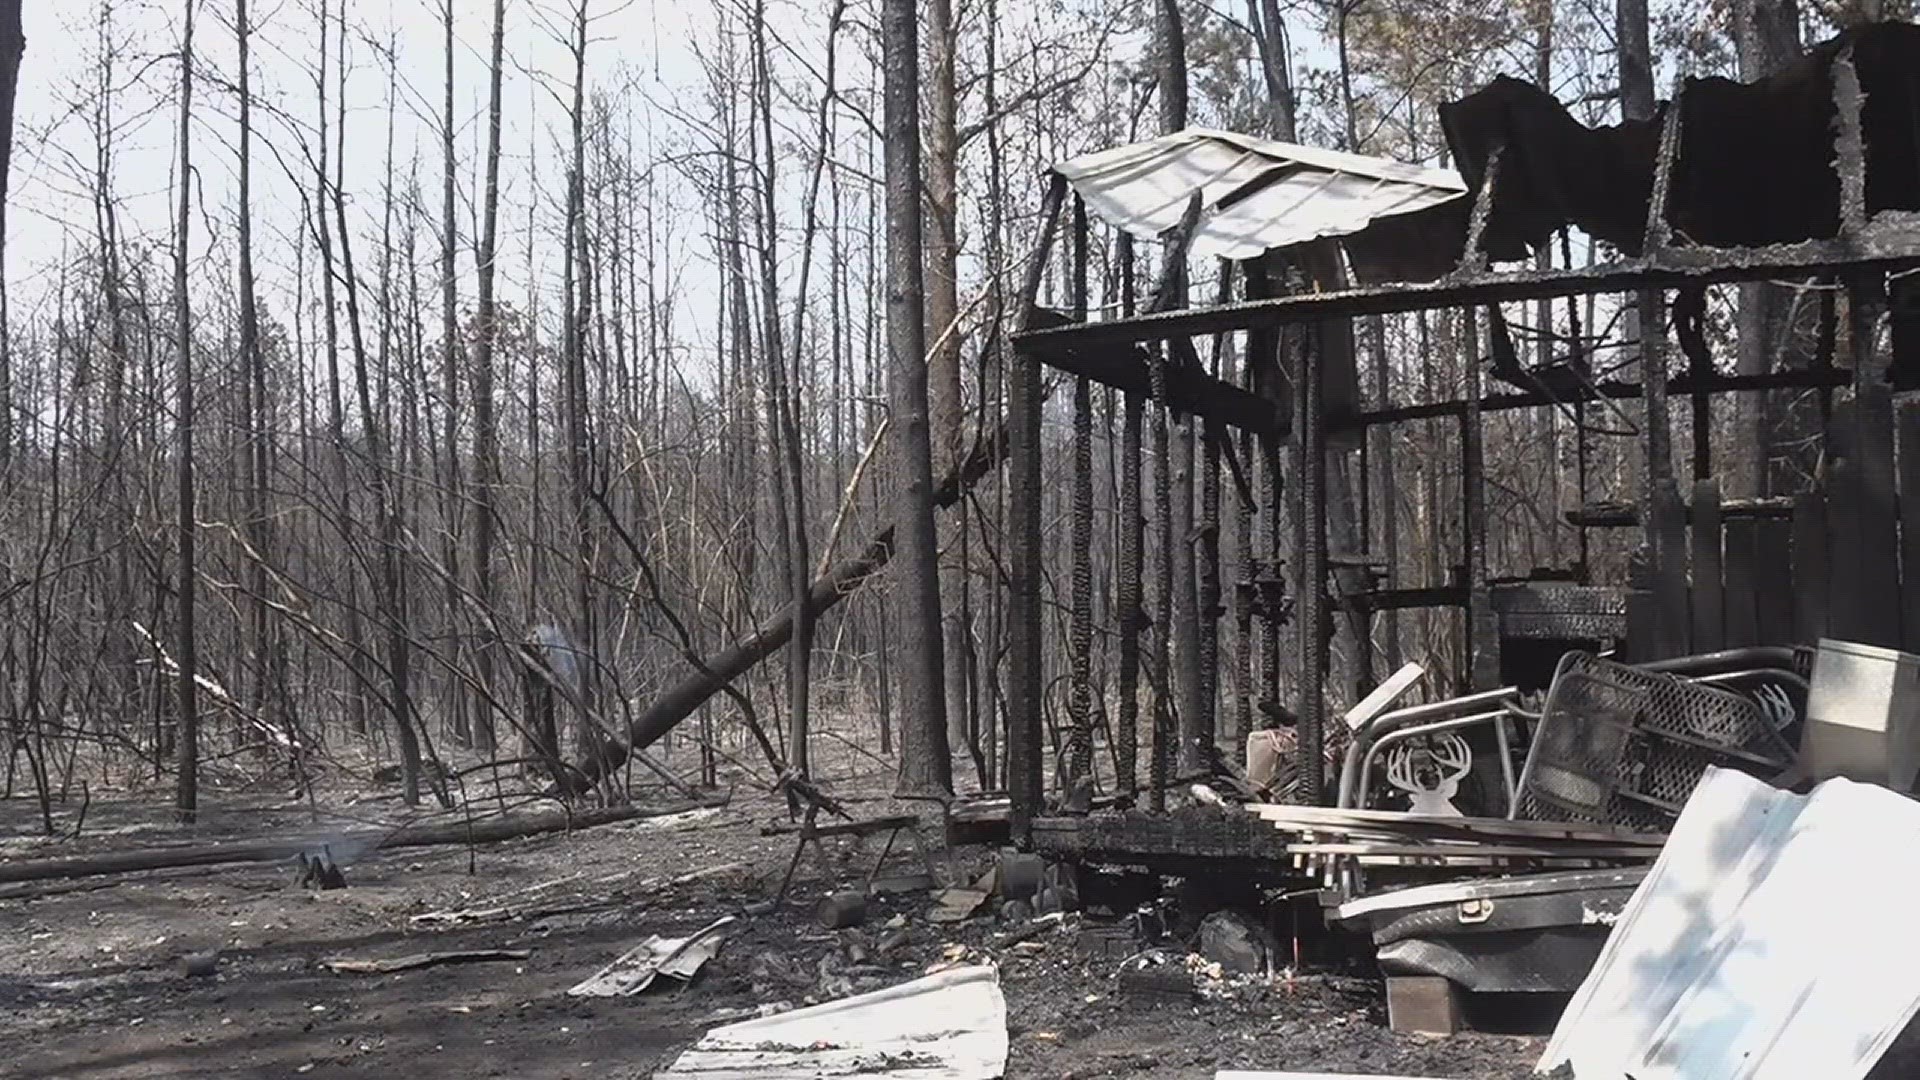 A total of six residences, three hunting camps and seven barns or outbuildings have been destroyed